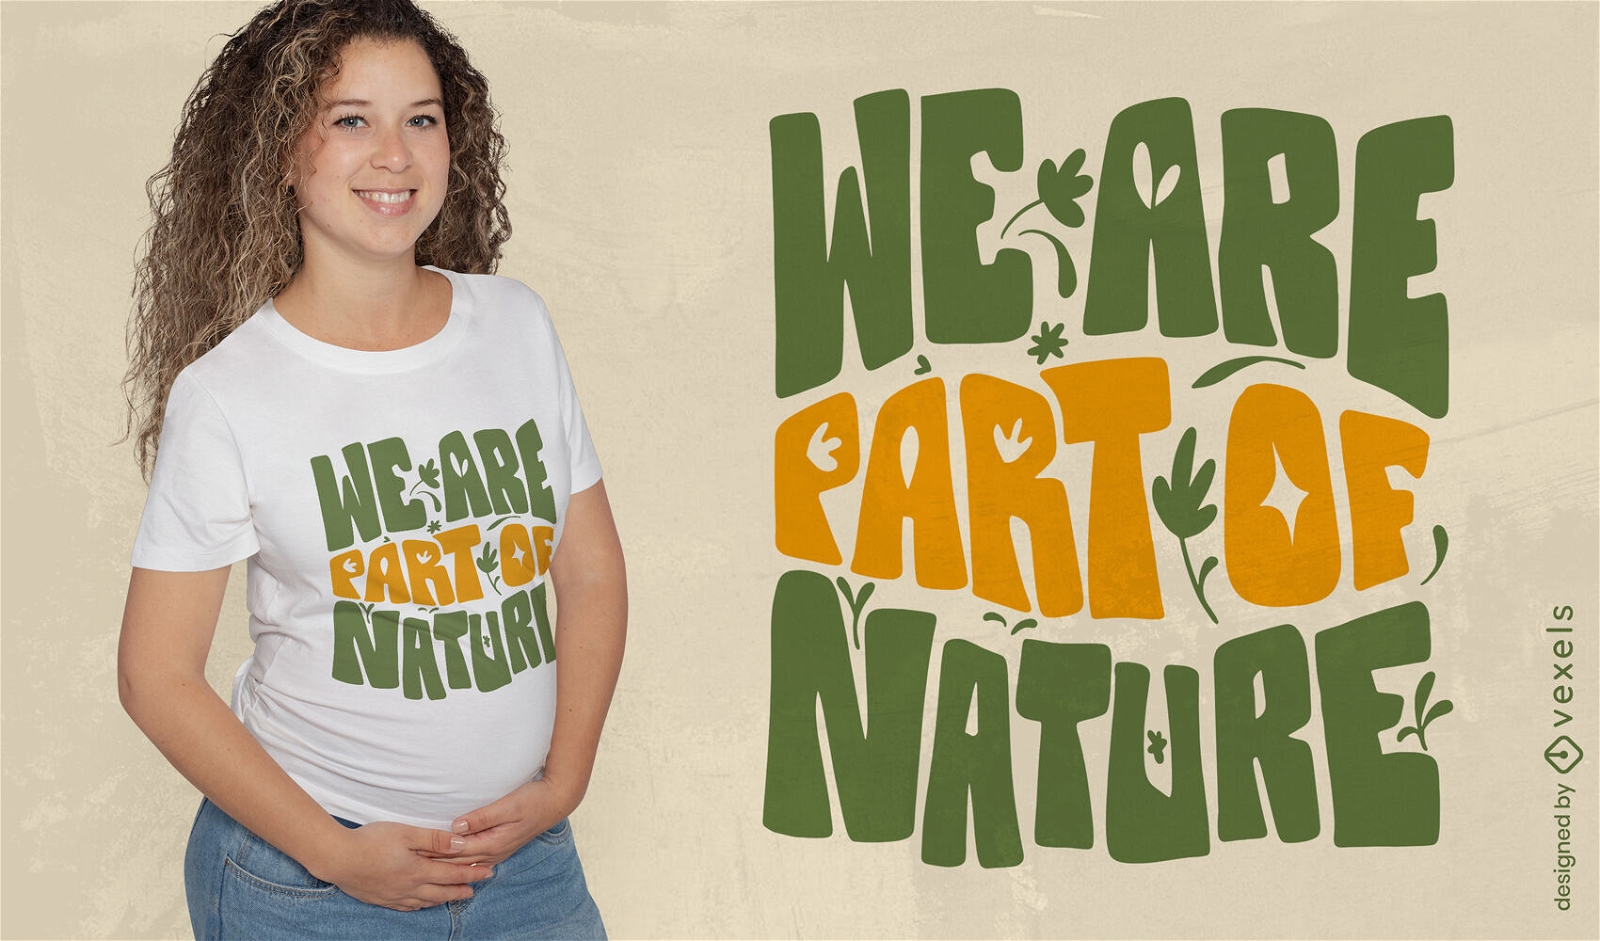 We are part of nature t-shirt design